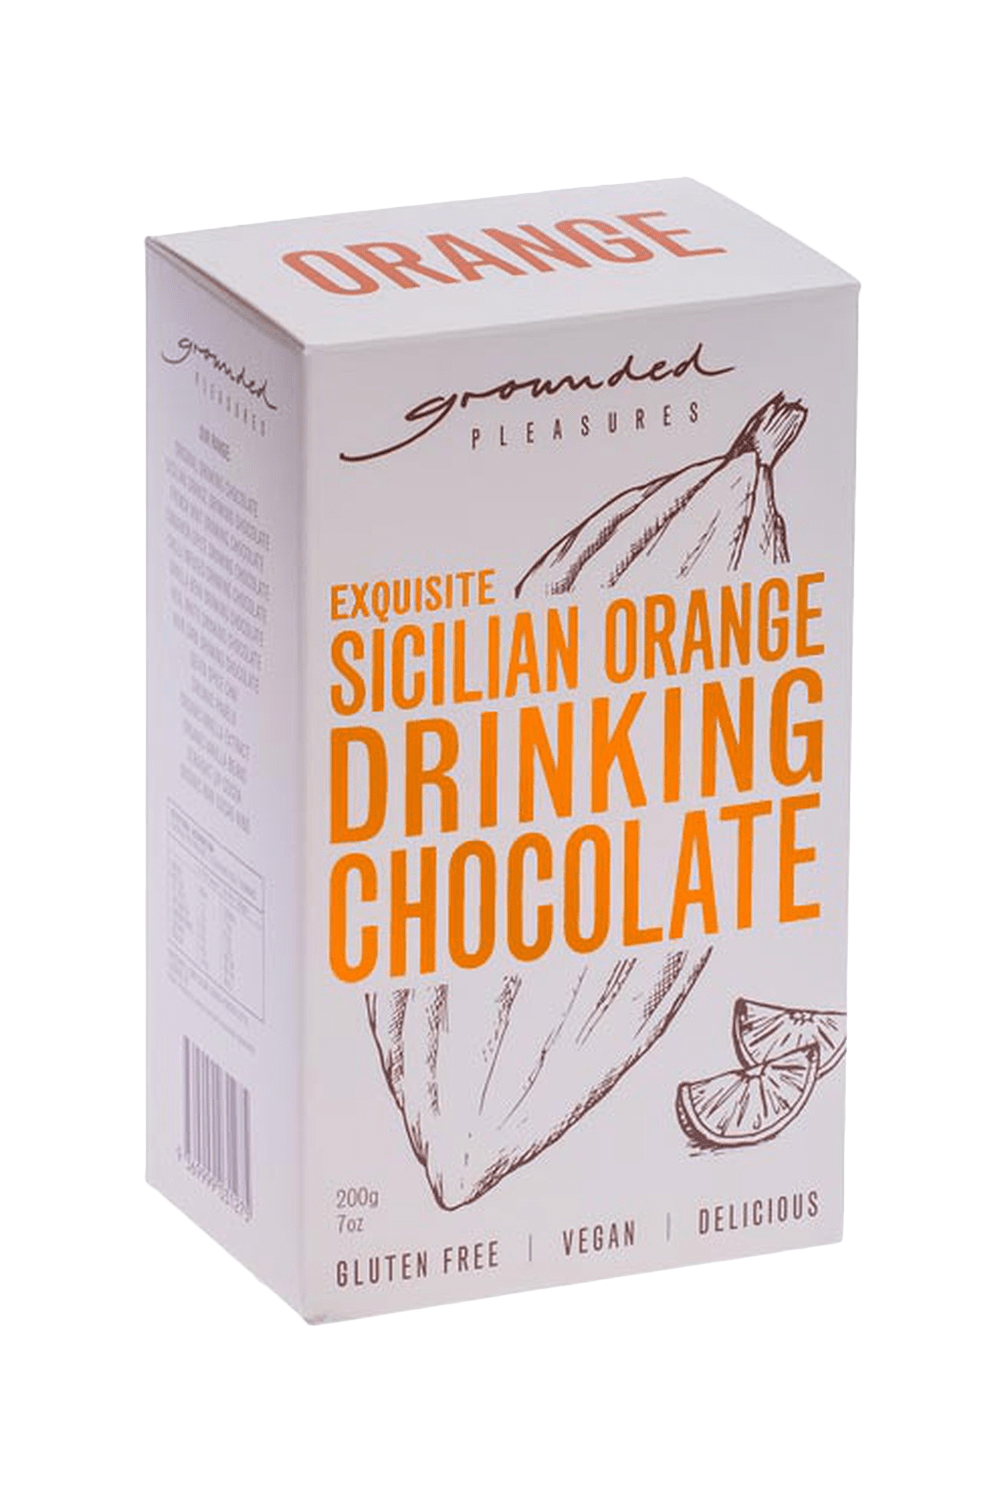 buy cafe products grounded pleasures drinking chocolate SICILIAN orange drinking chocolate